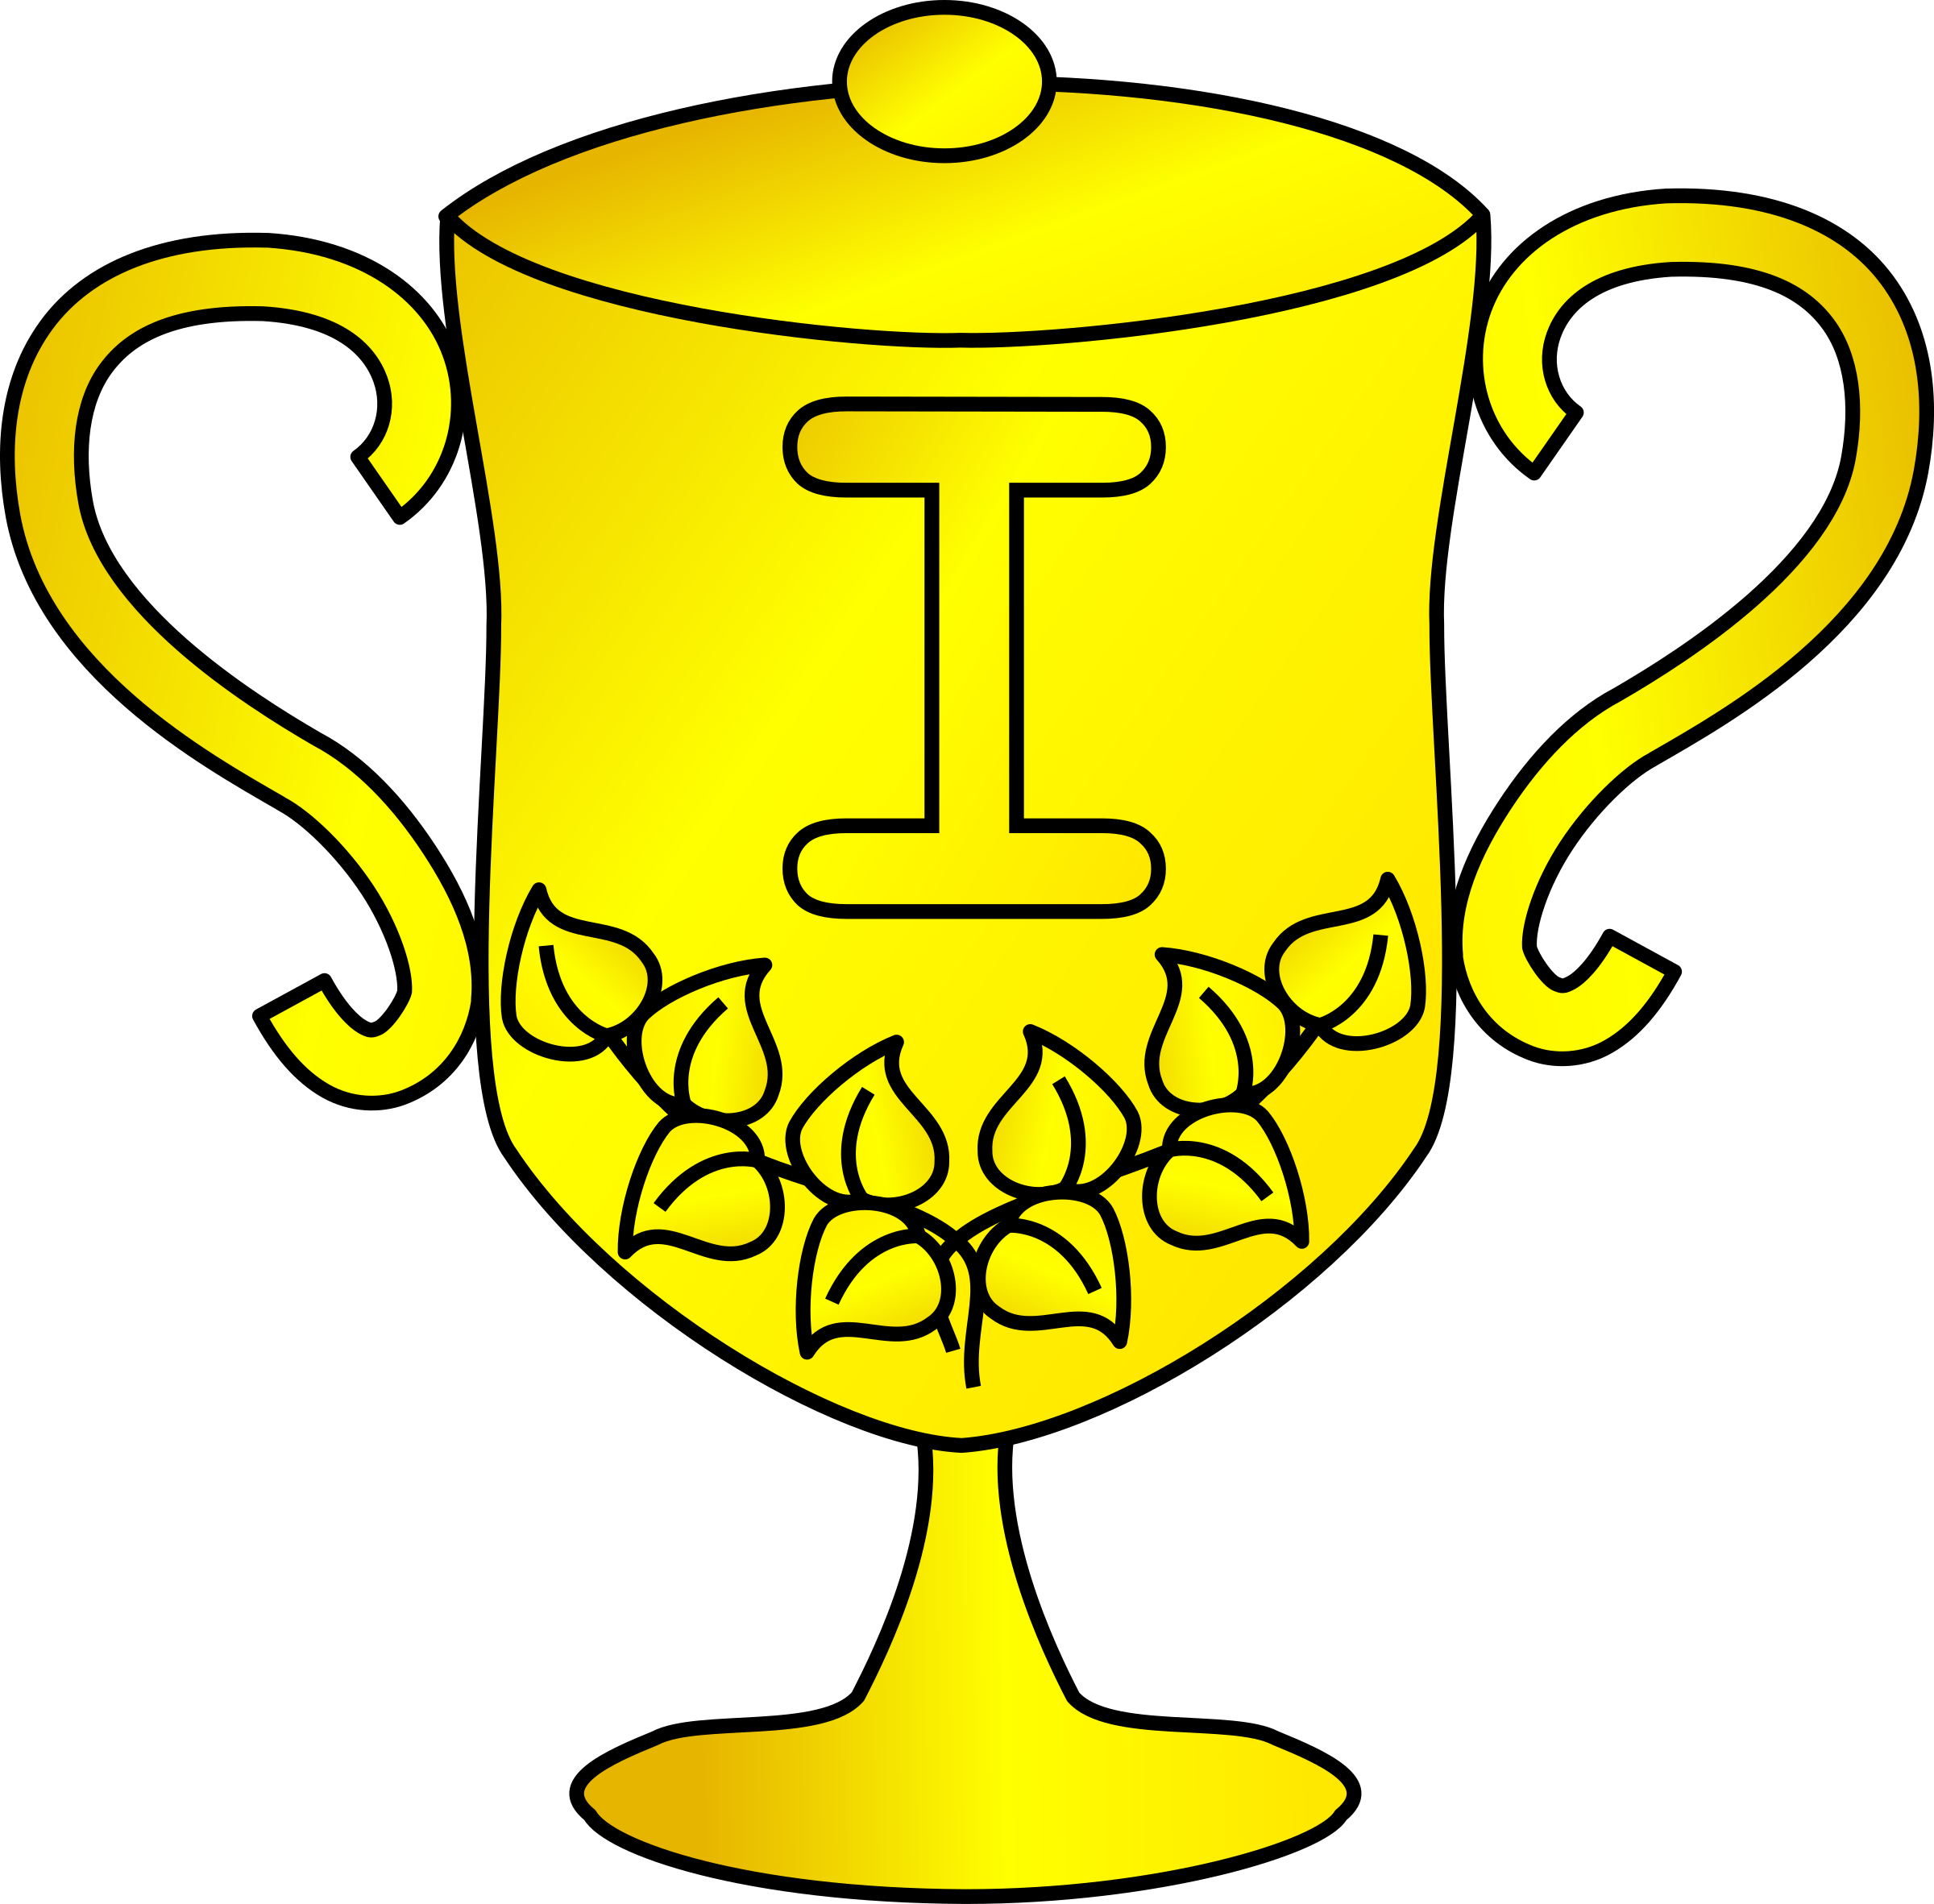 clipart football trophy